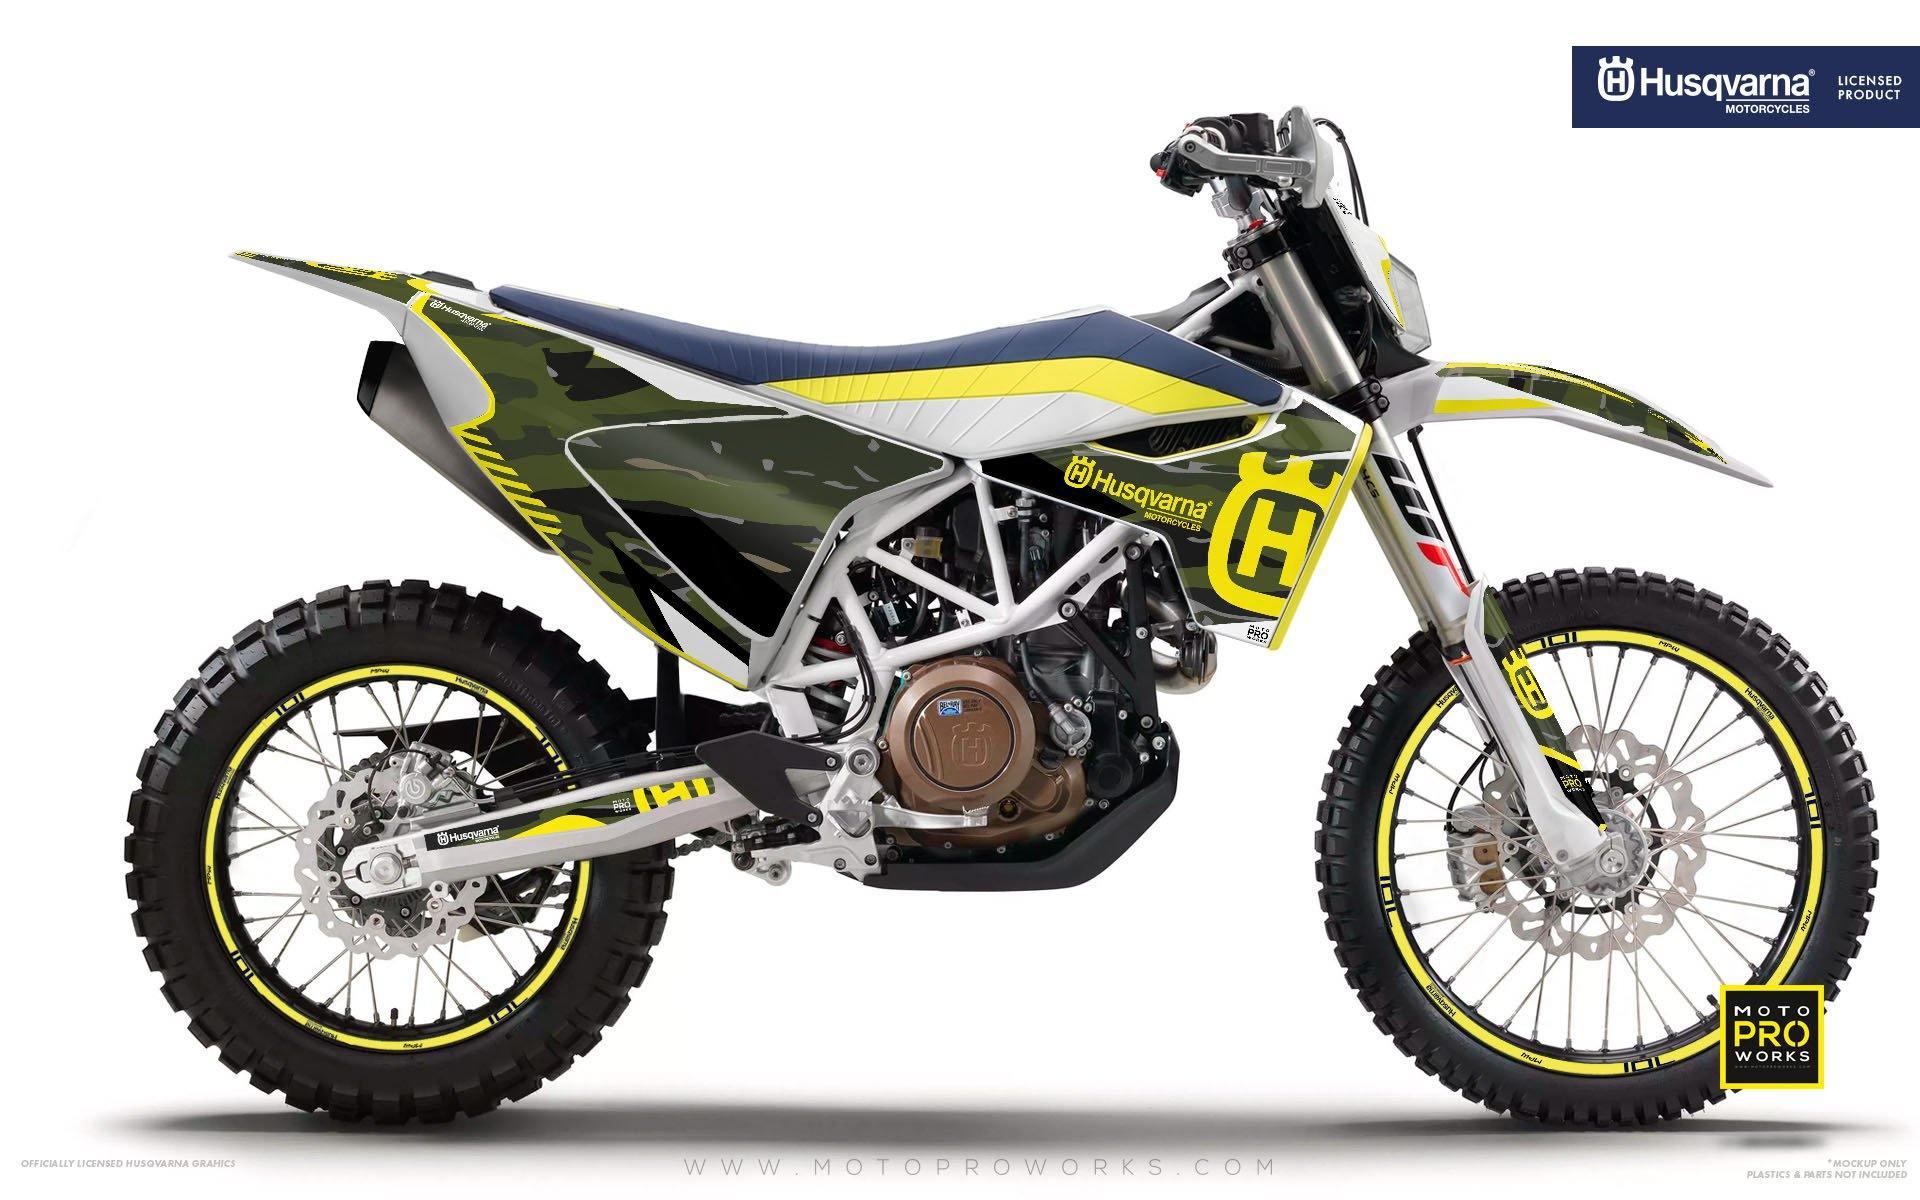 Husqvarna GRAPHIC KIT - "FACTOR" (Tigercamo/nordic) - MotoProWorks | Decals and Bike Graphic kit